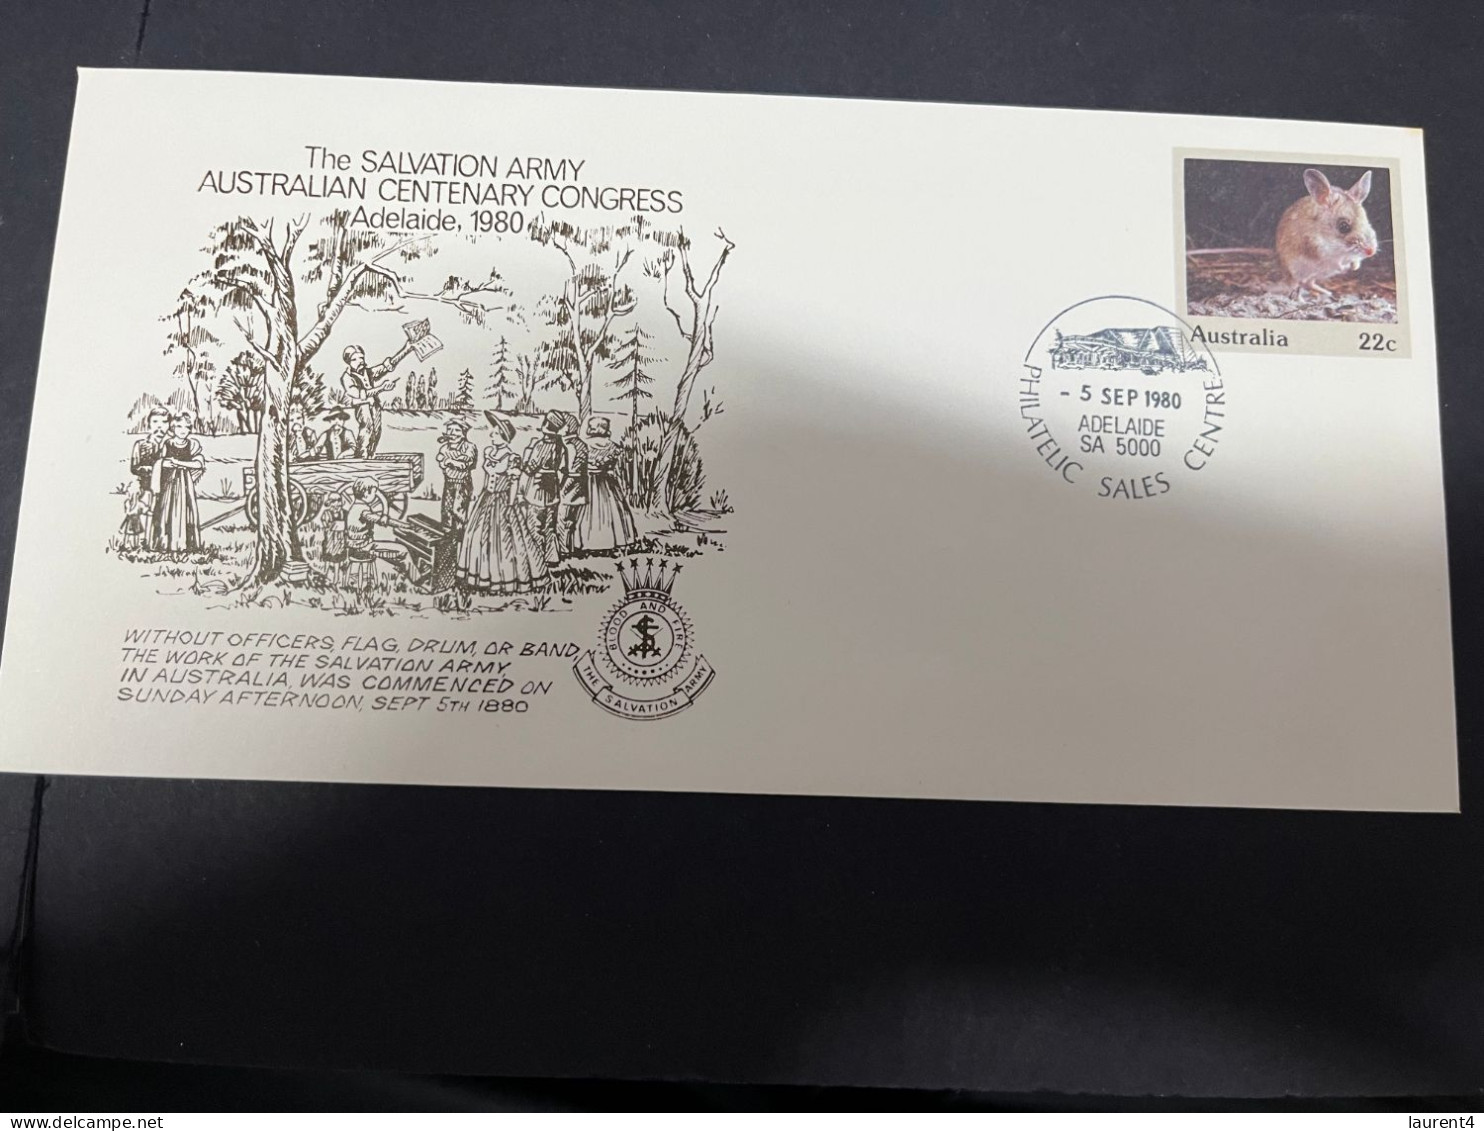 30-4-2023 (3 Z 29) Australia FDC (1 Covers) 1980- Salvation Army Australian Centenary Congress In Adelaide - Premiers Jours (FDC)